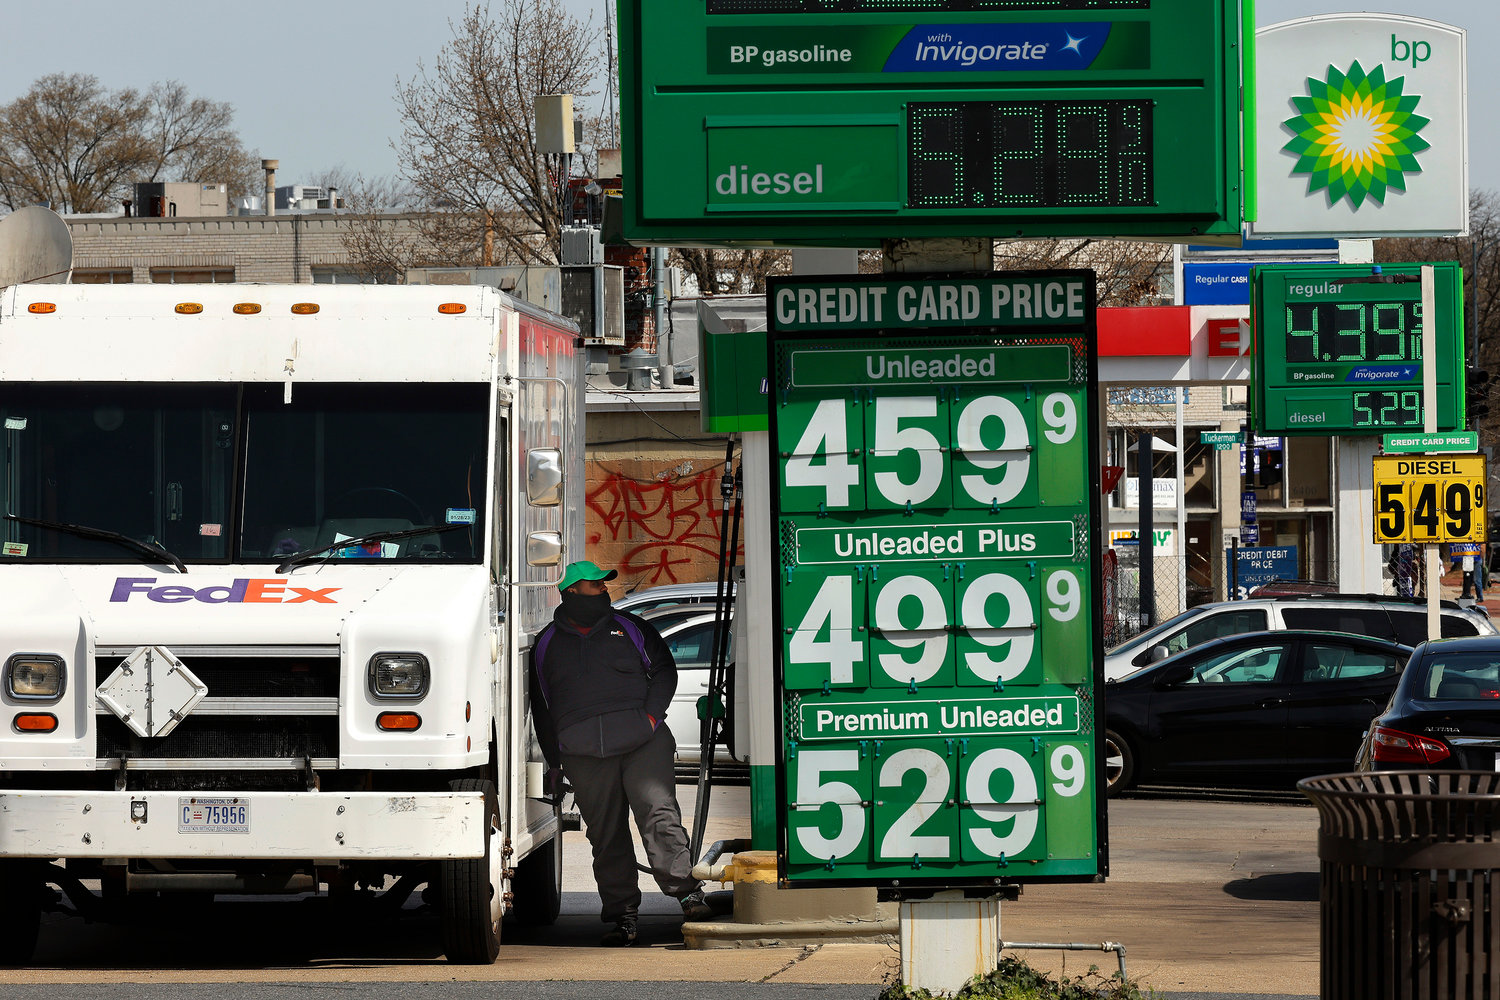 Gasoline prices hover around $4.00 a gallon for the least expensive grade at several gas stations in the nation's capital on April 11, 2022, in Washington, D.C. (Chip Somodevilla/Getty Images/TNS)